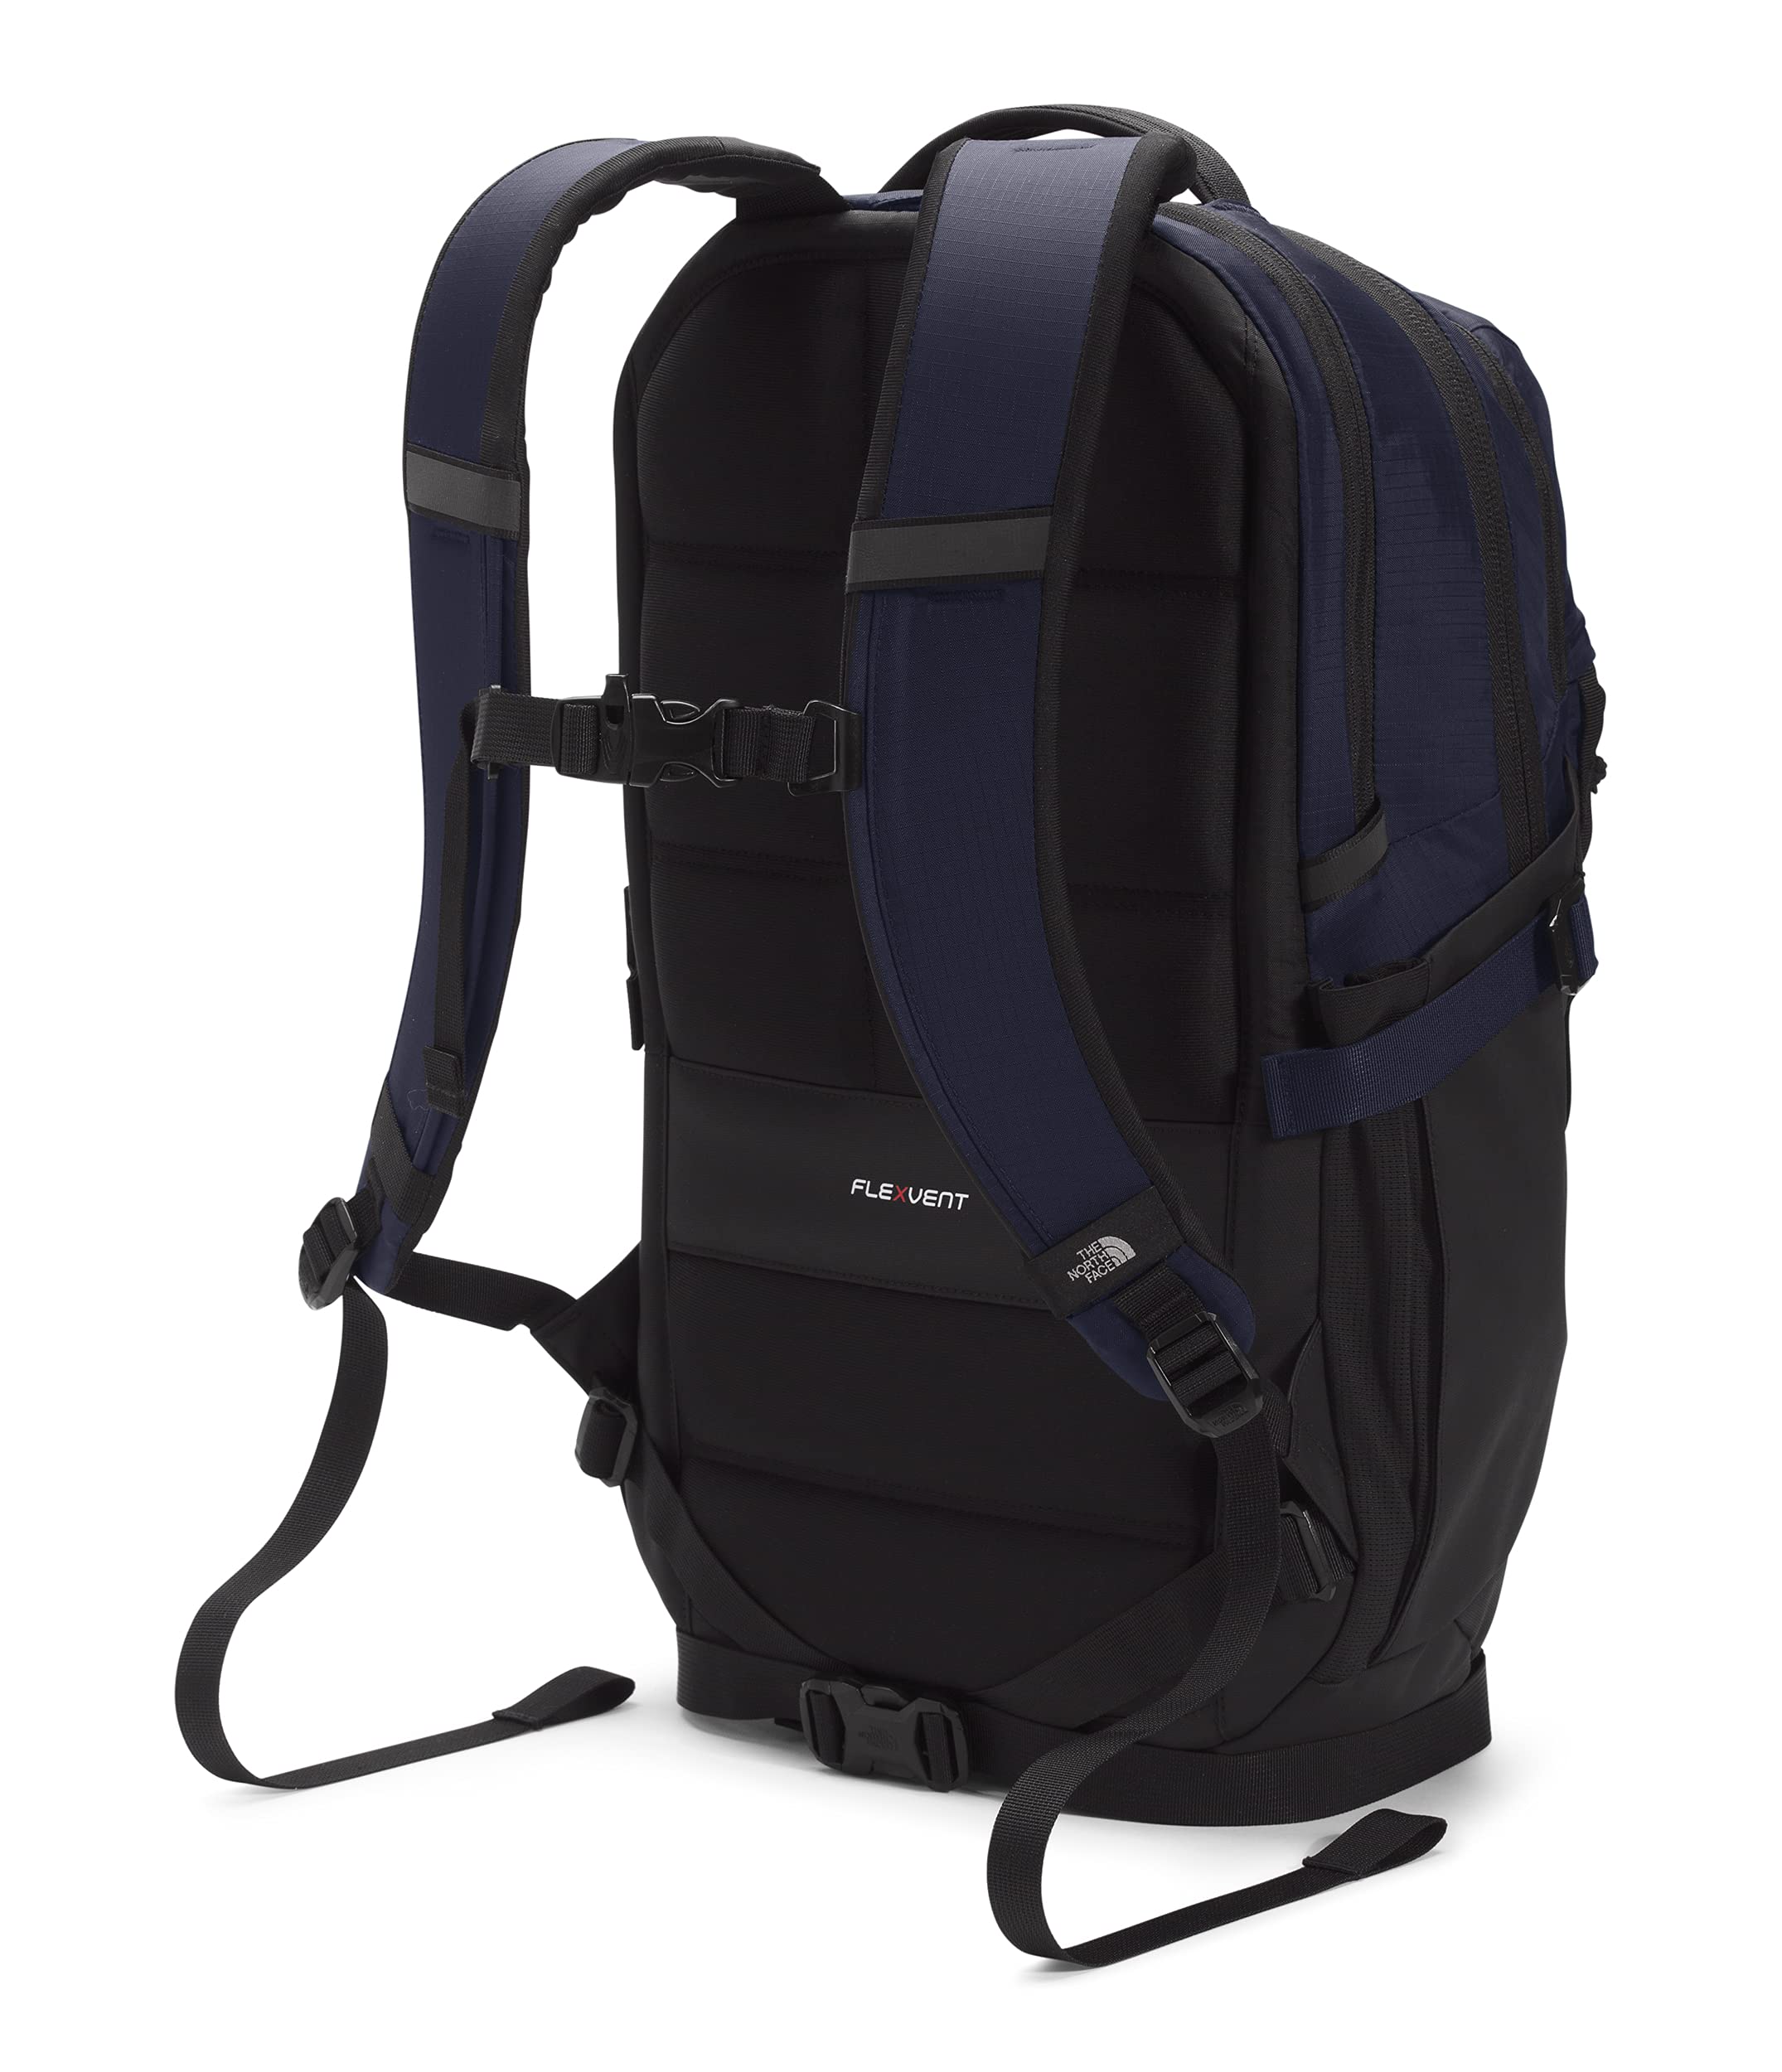 THE NORTH FACE Recon Laptop Backpack, TNF Navy/TNF Black, One Size